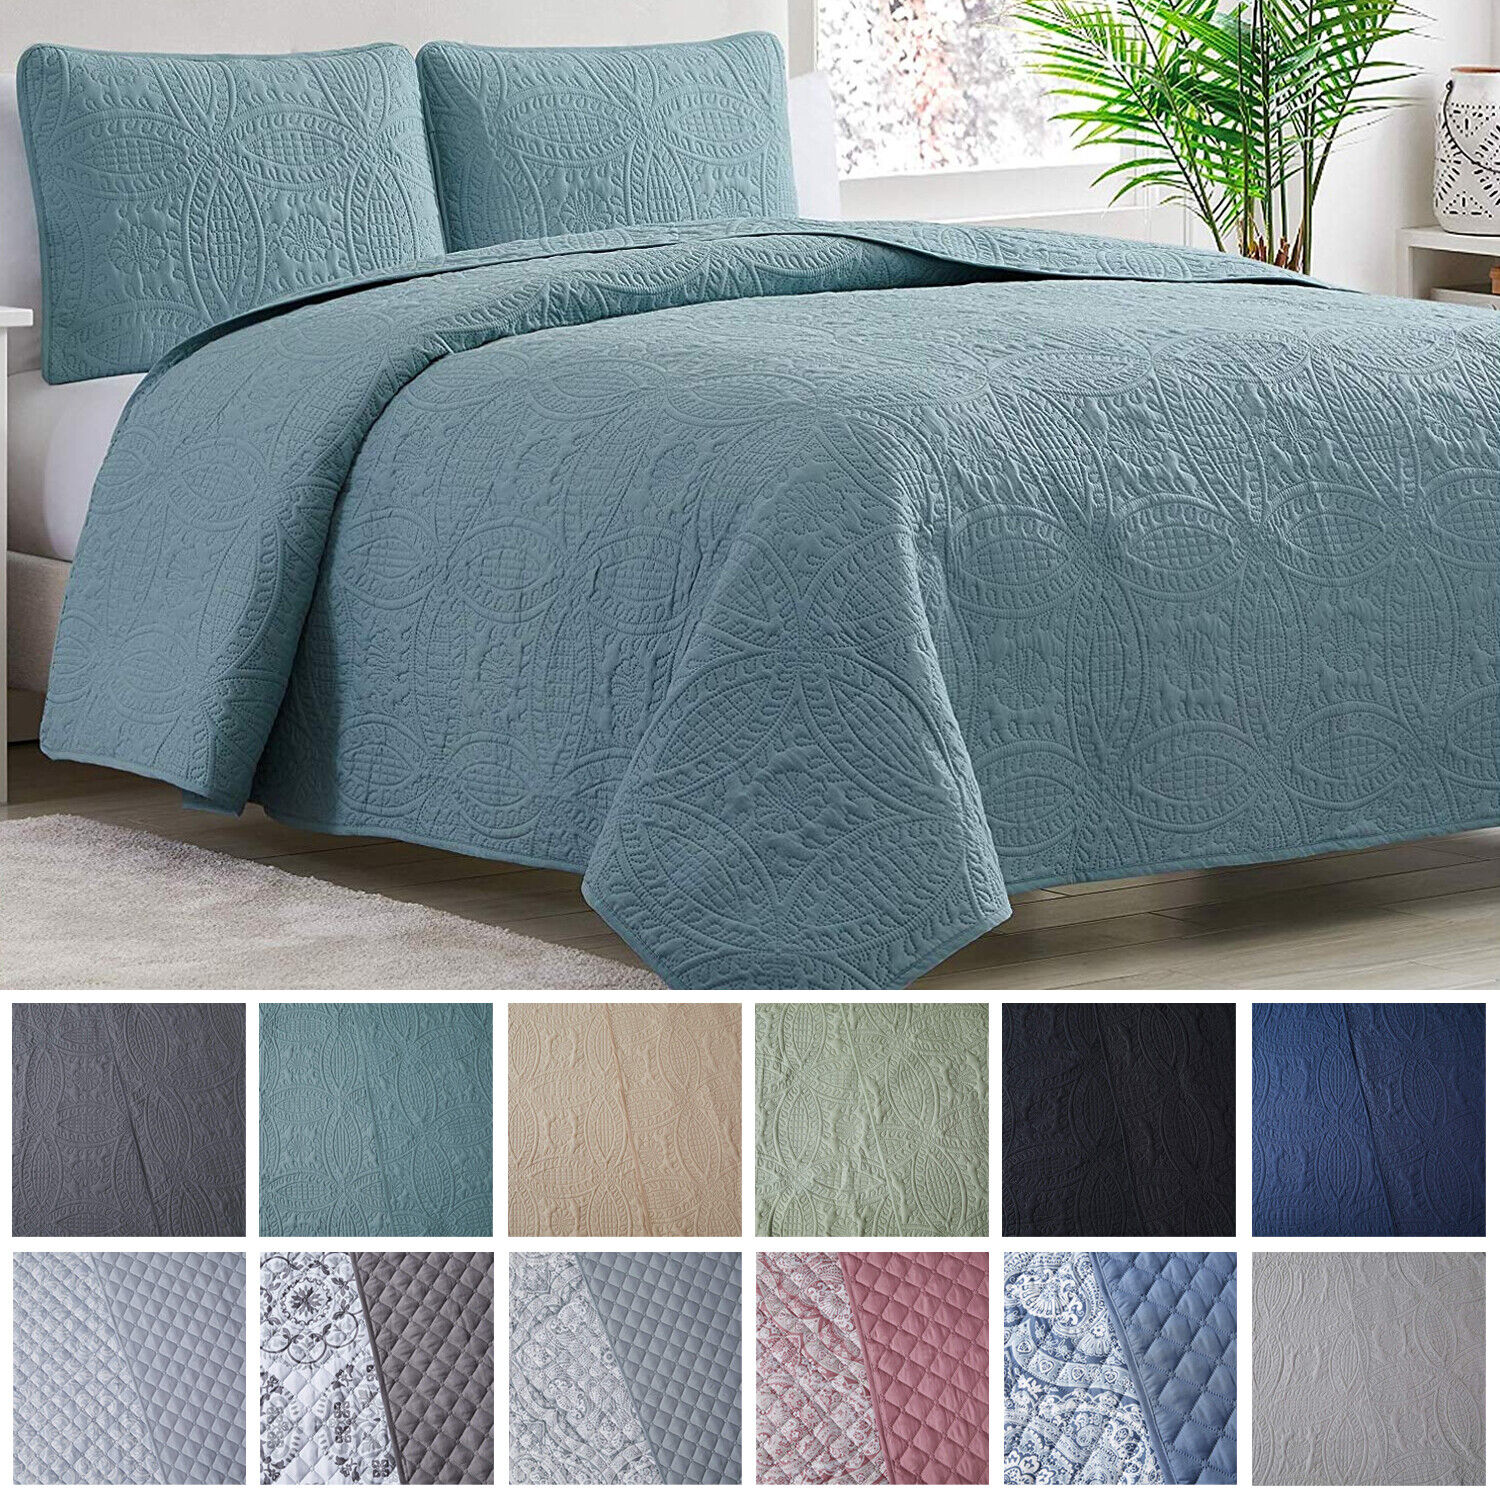 Mellanni Bedspread Coverlet Set 3-Piece Oversized Bed Cover,